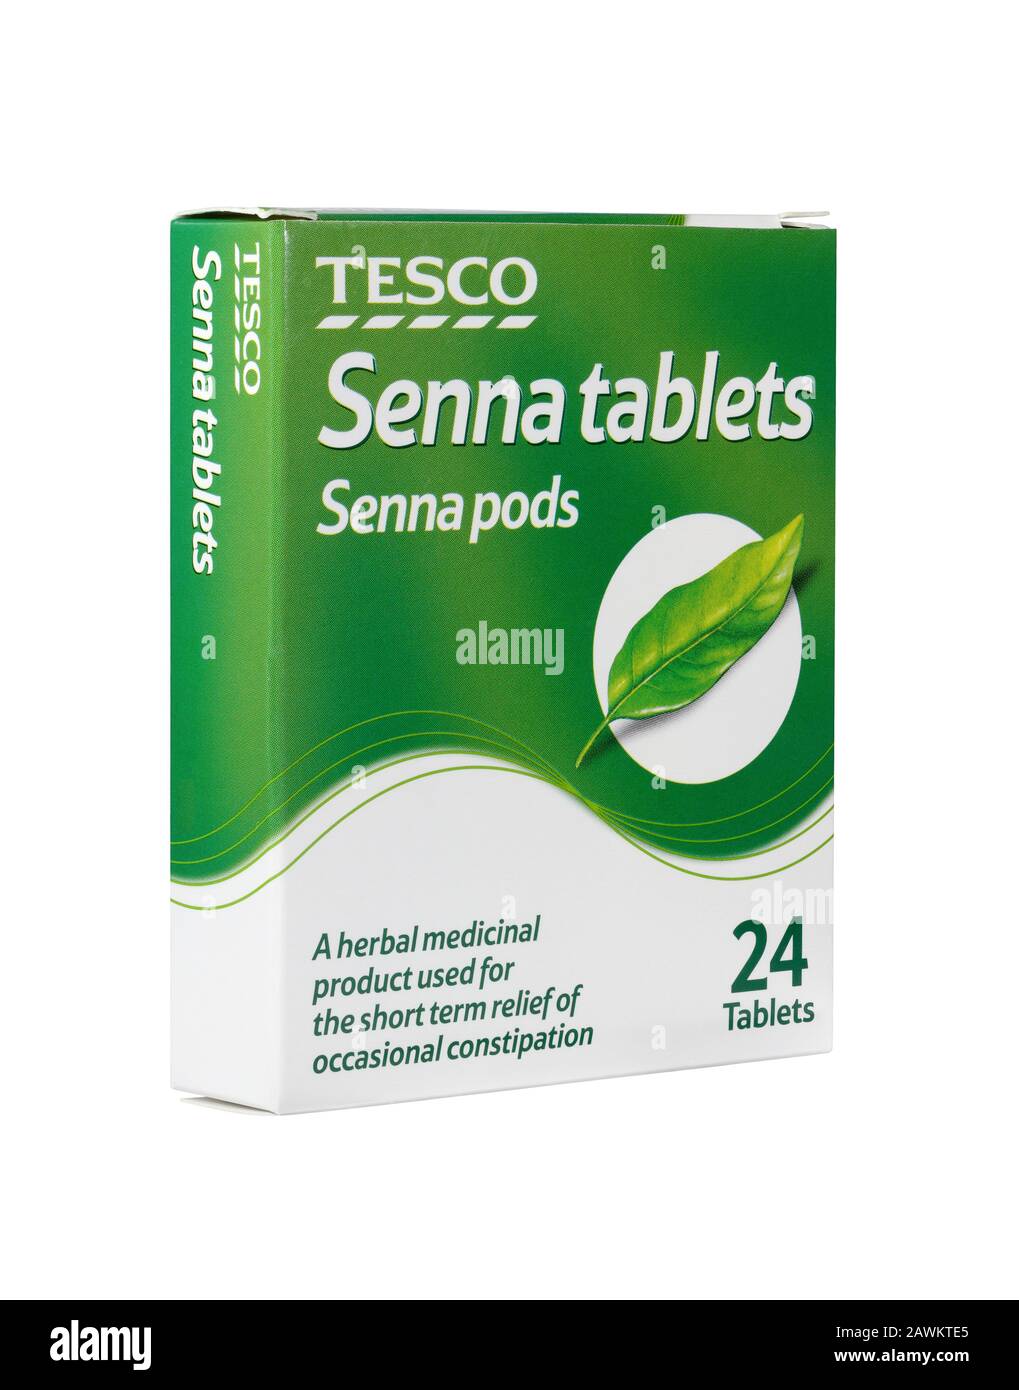 24 Tesco Senna tablets, Senna pods, isolated on a white background. A herbal medicinal product used for the short term relief of occasional constipati Stock Photo